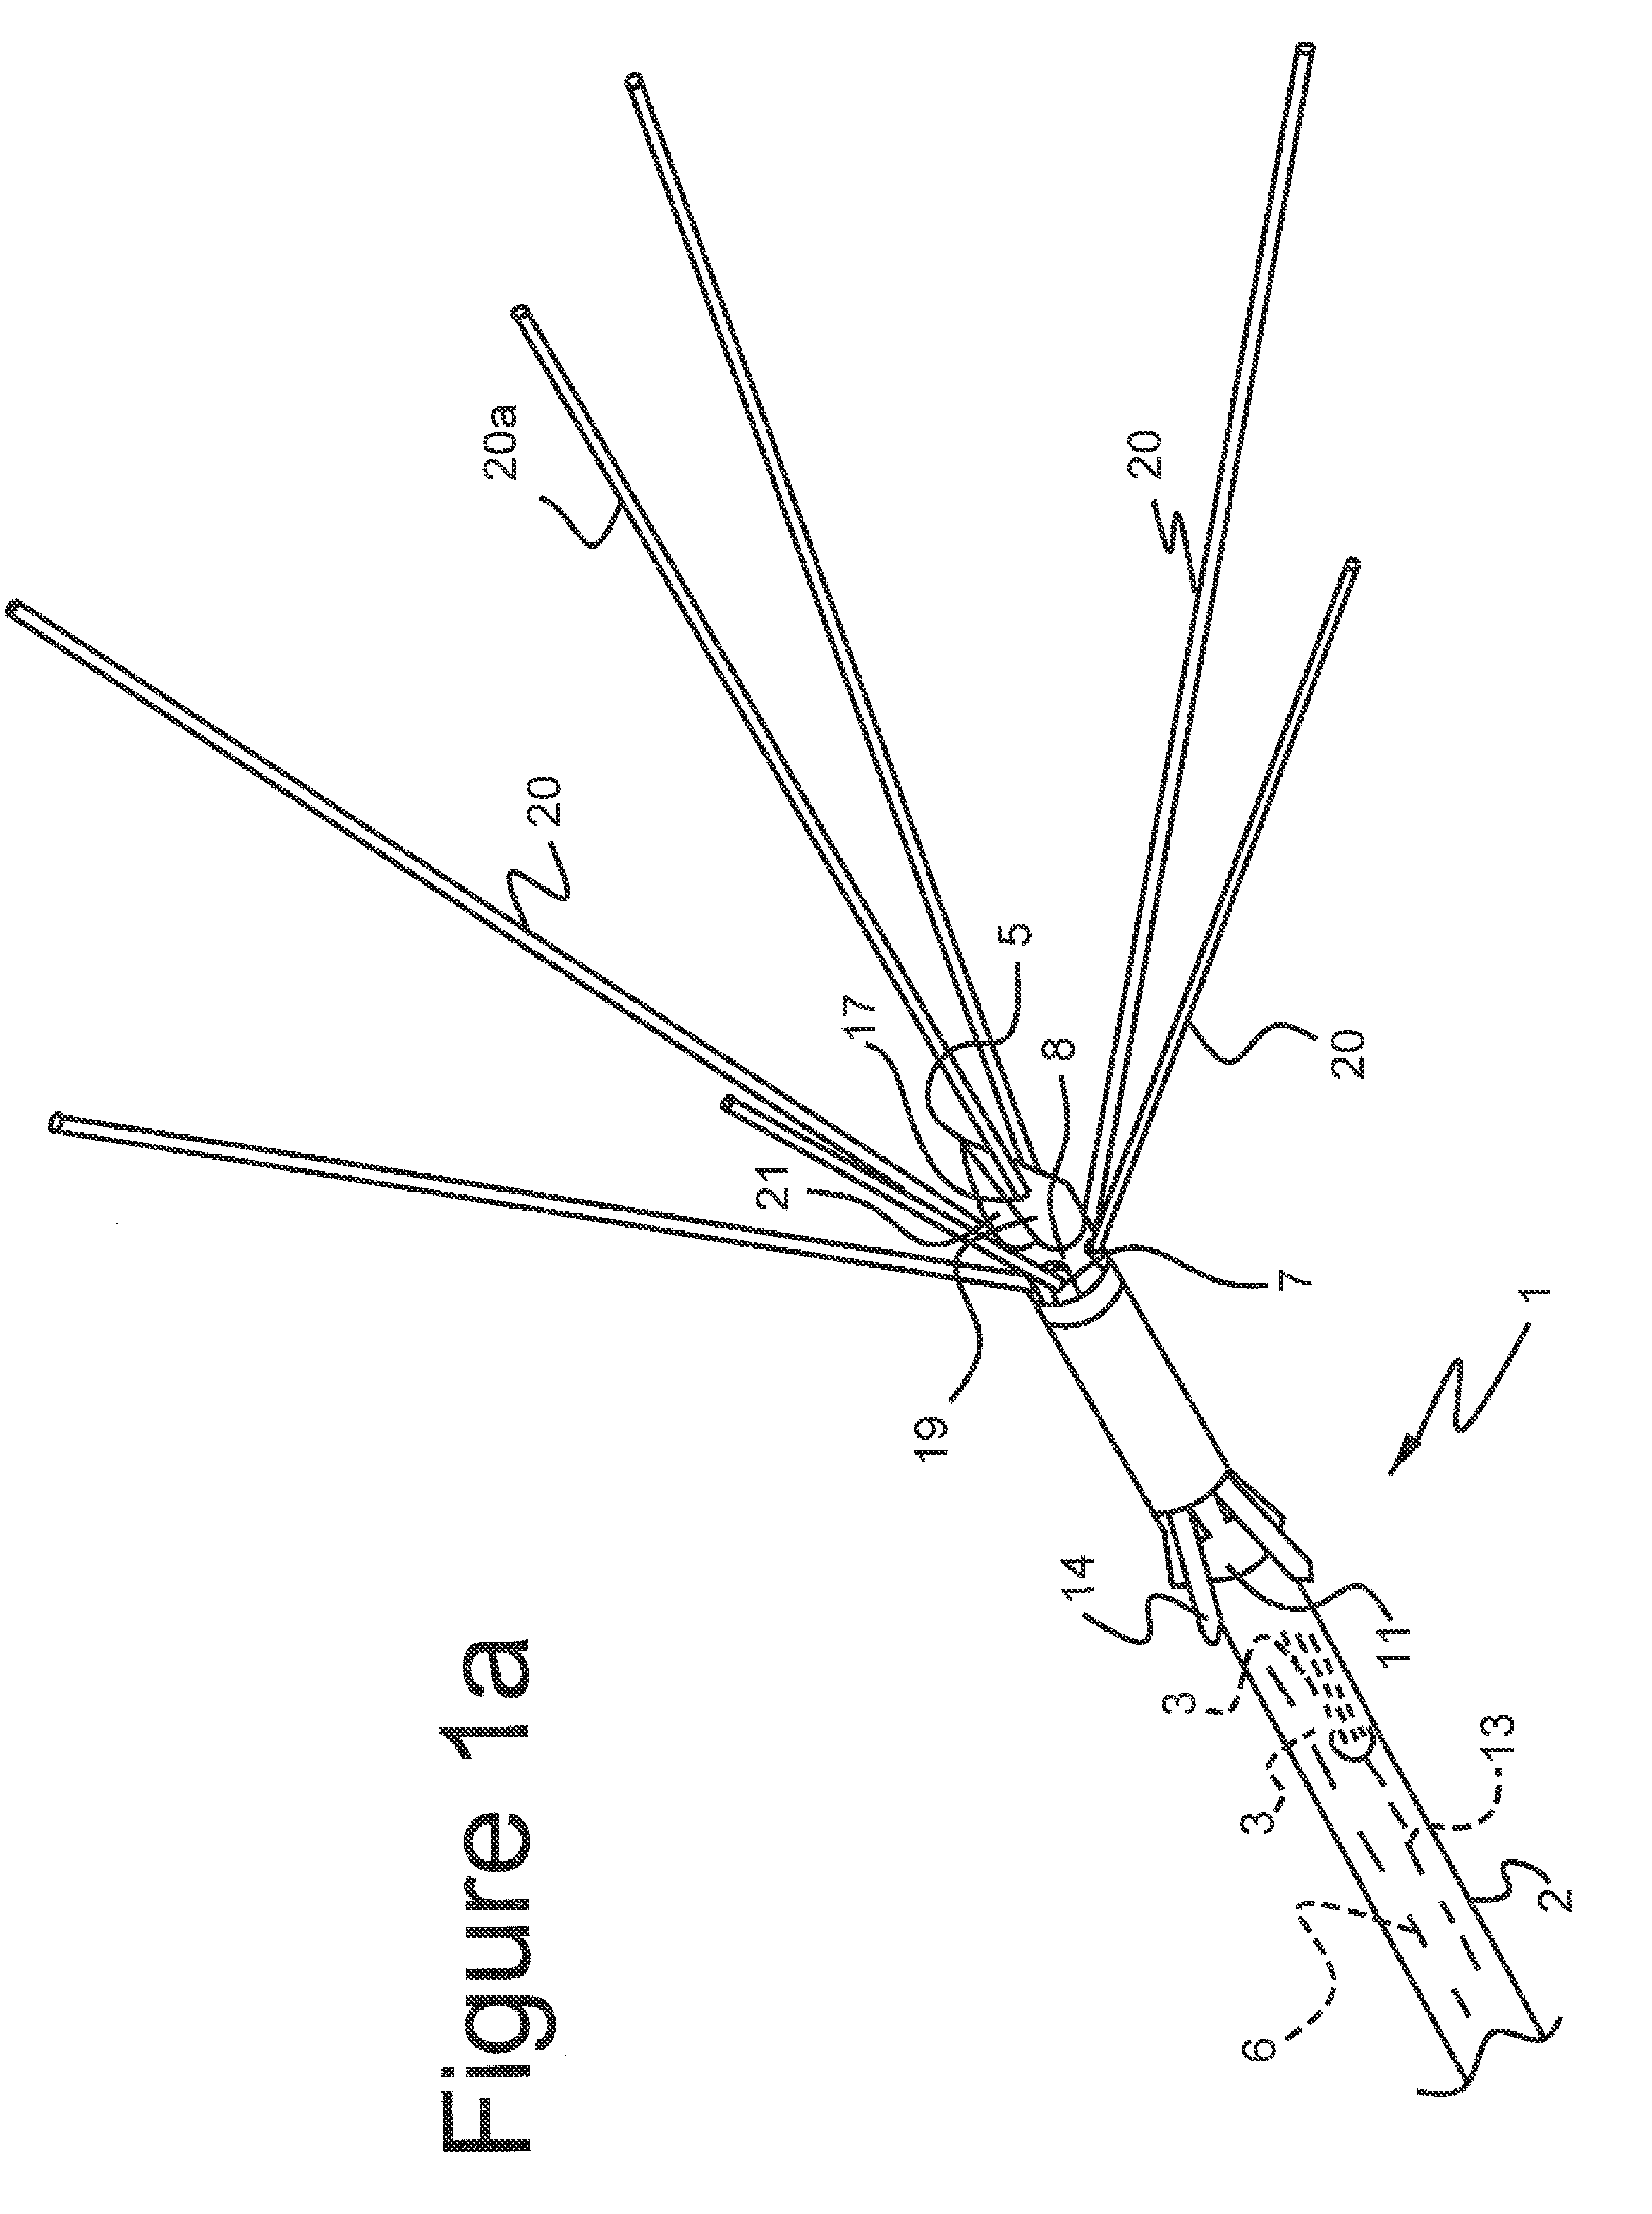 User interface and navigational tool for remote control of an anchored RF ablation device for destruction of tissue masses